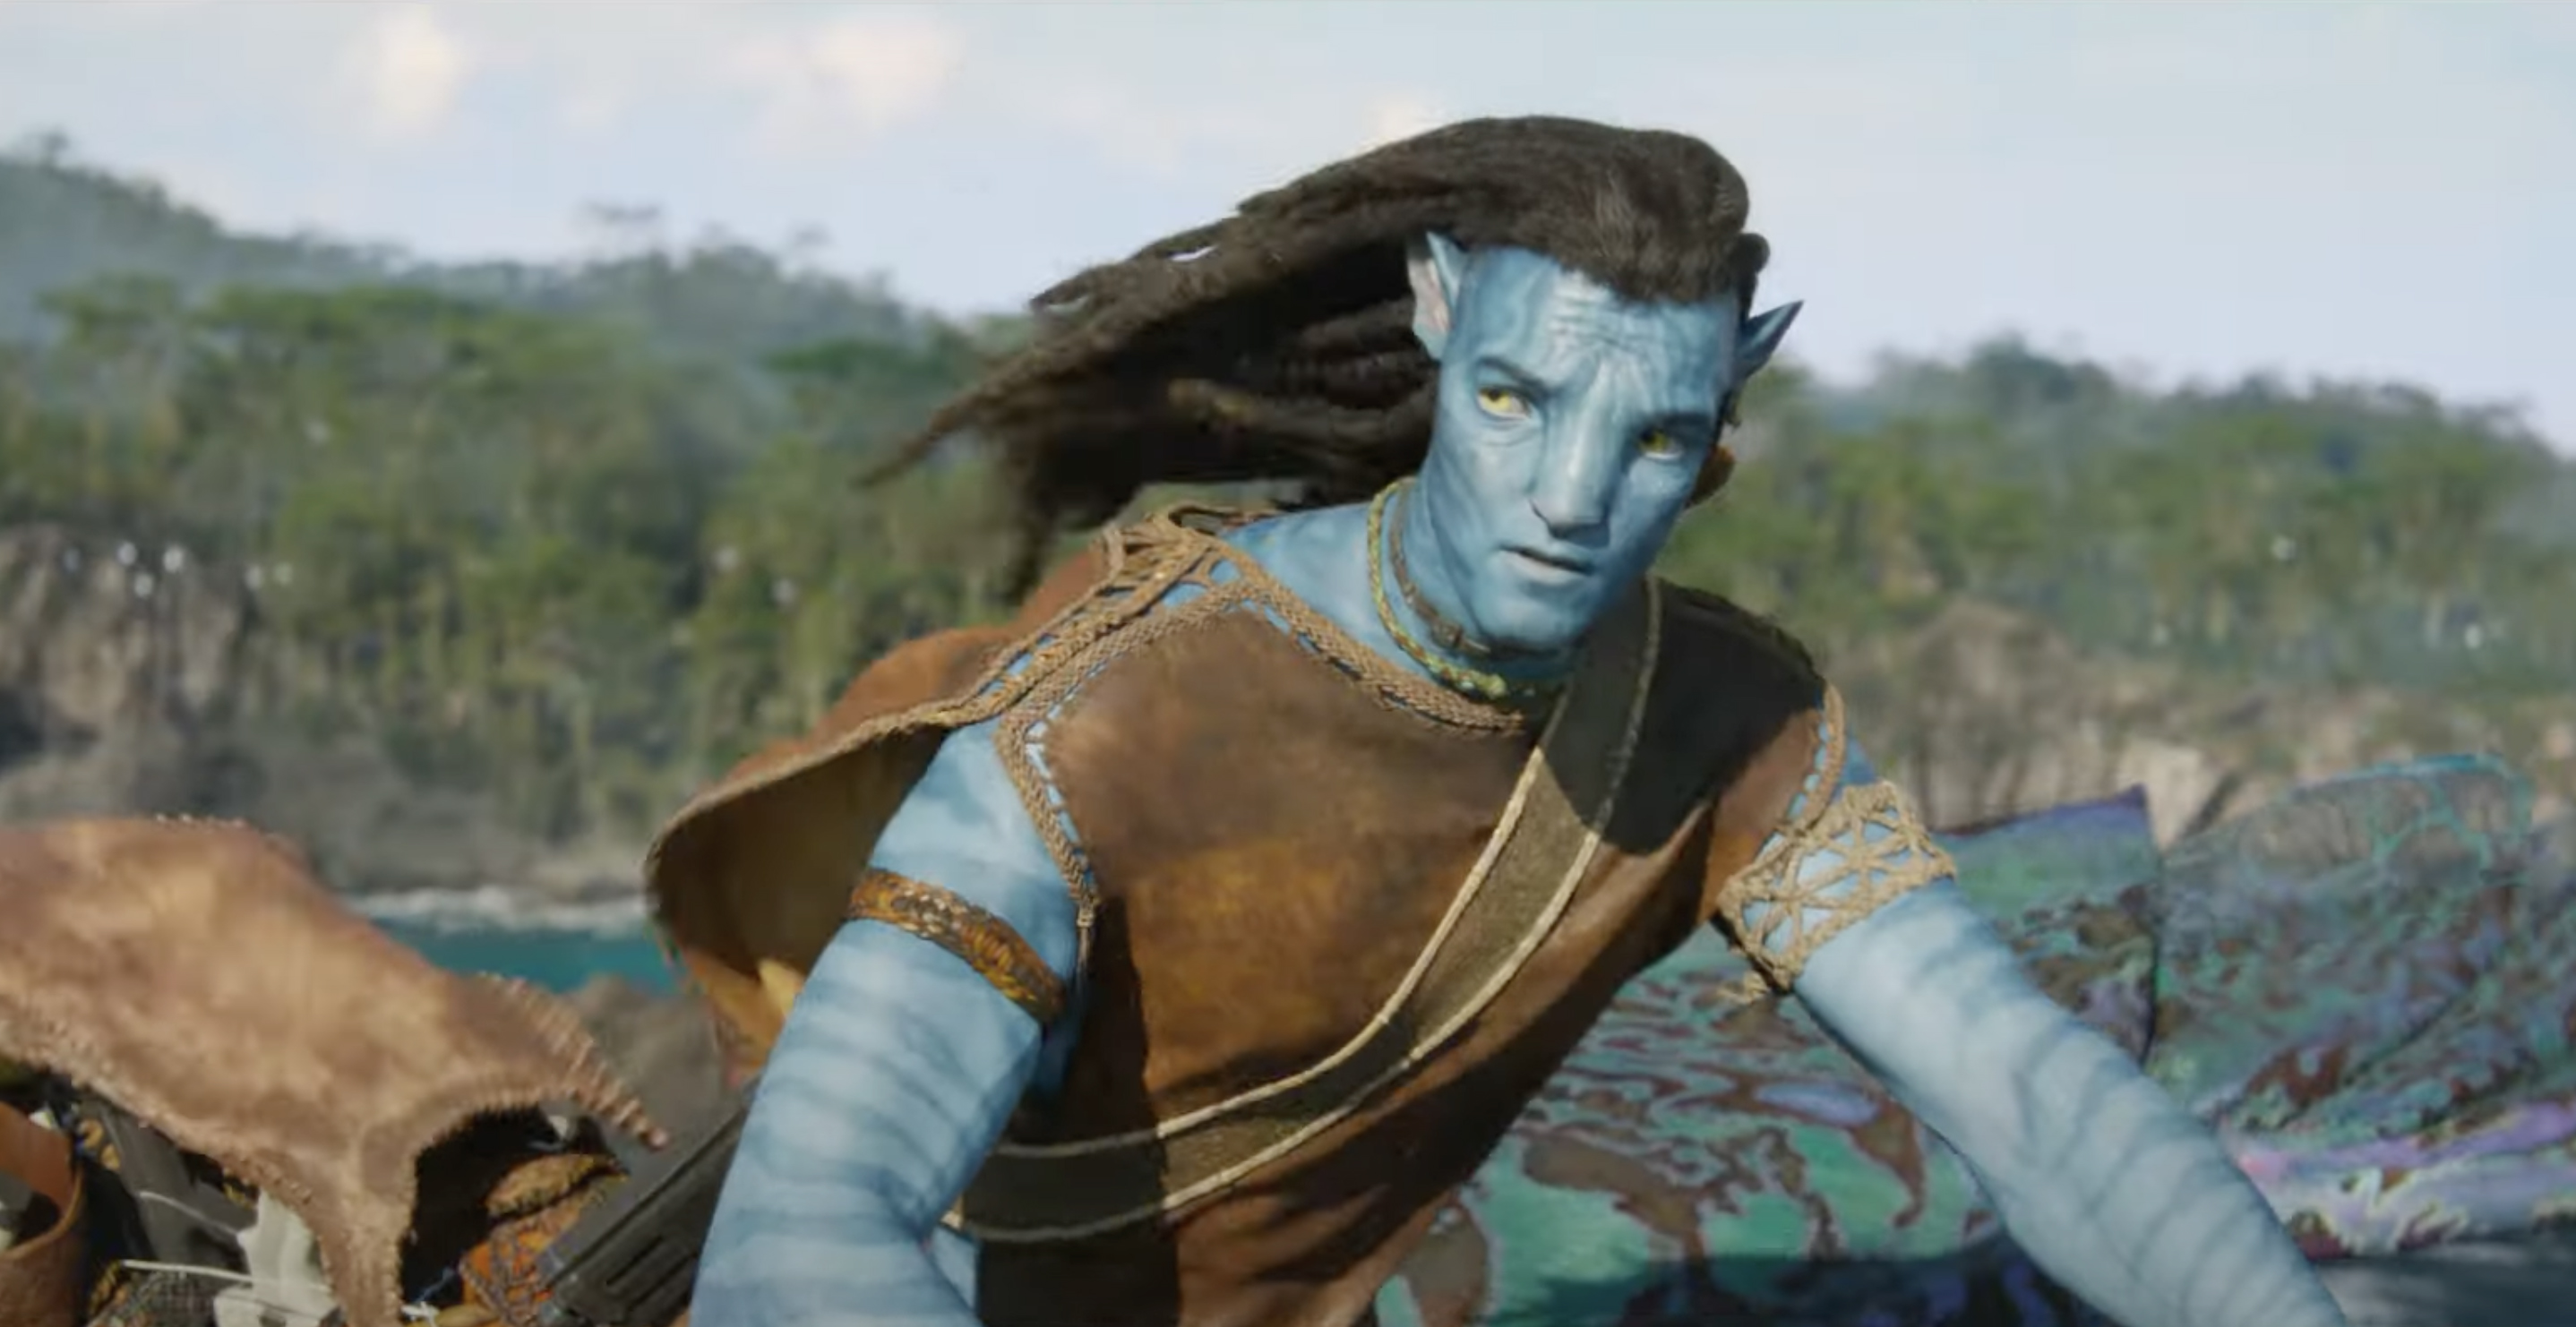 I want to talk about the characters  Avatar The Way of Water director  James Cameron says the CGI is not whats most exciting about sequel to his  2009 film  South